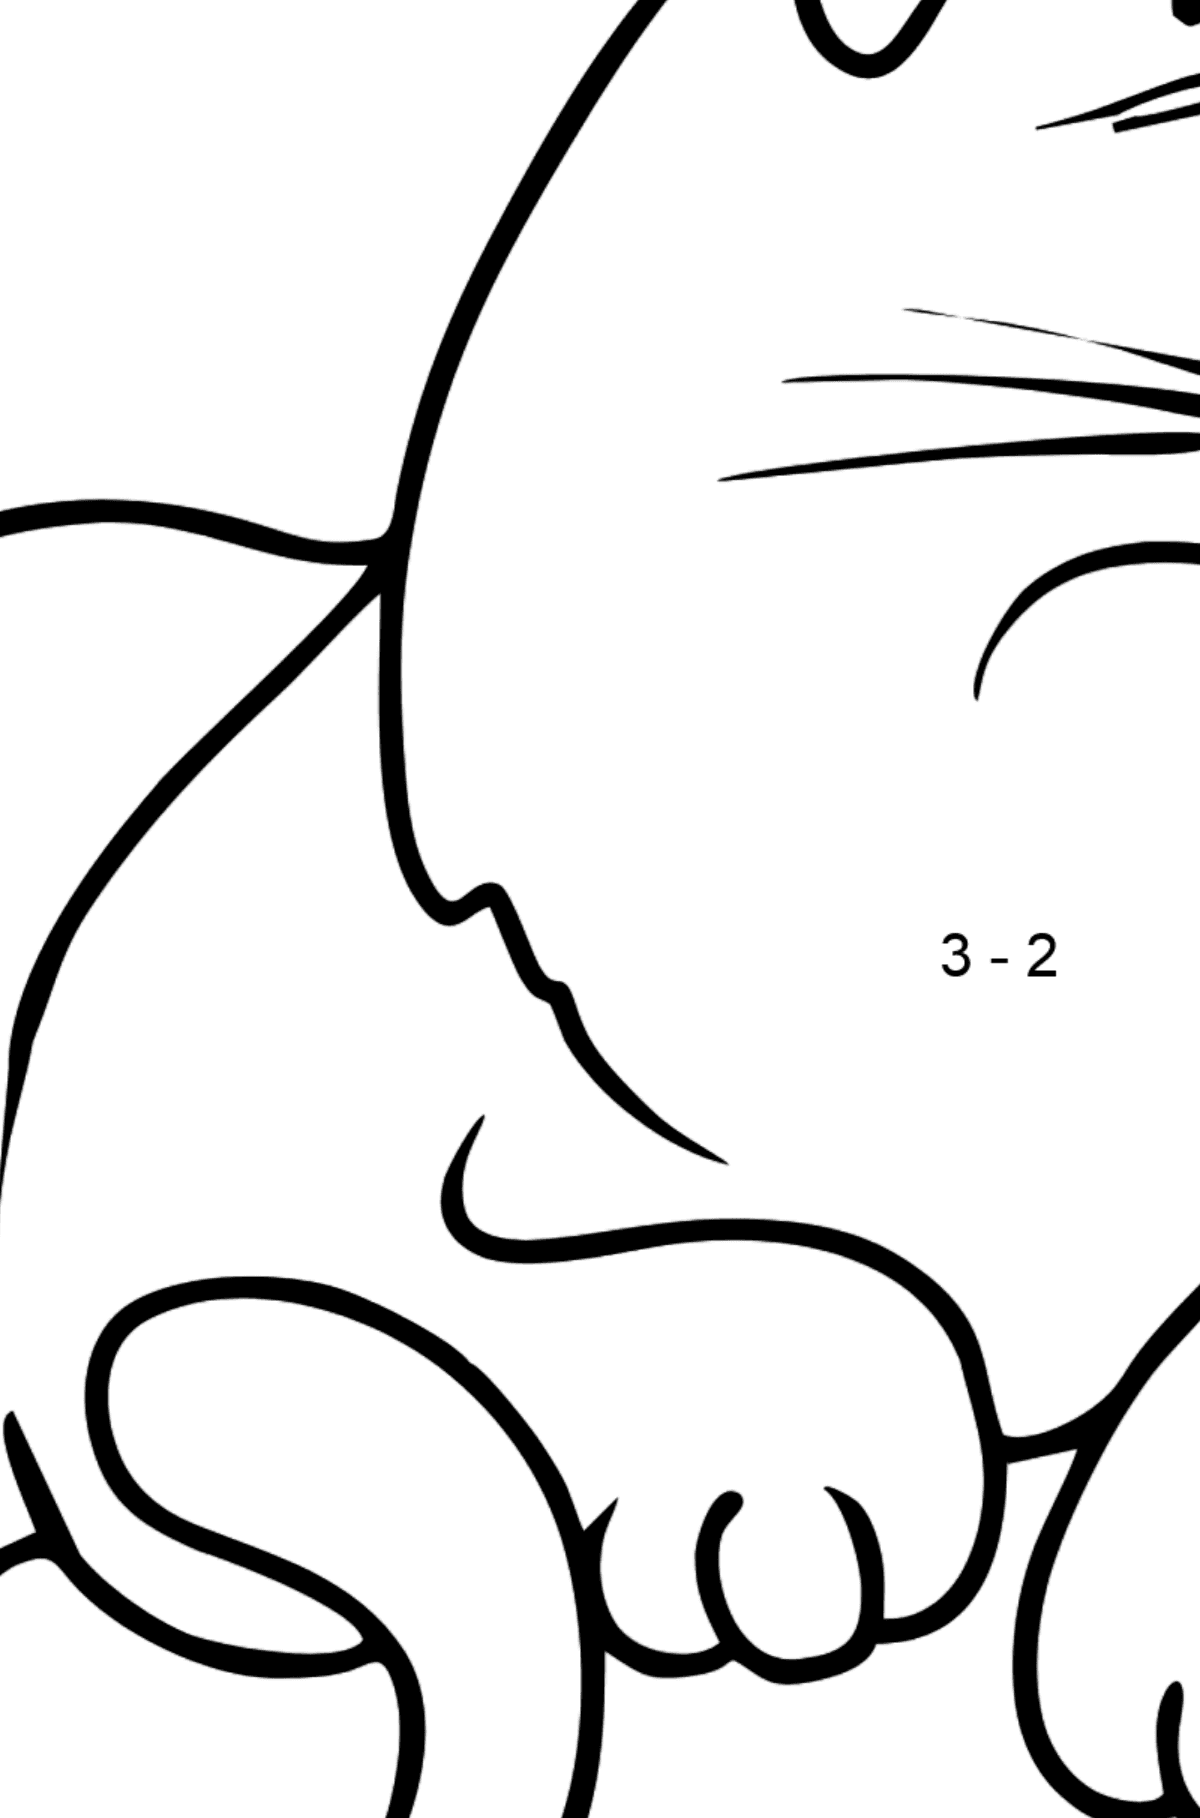 Panther coloring page - Math Coloring - Subtraction for Kids